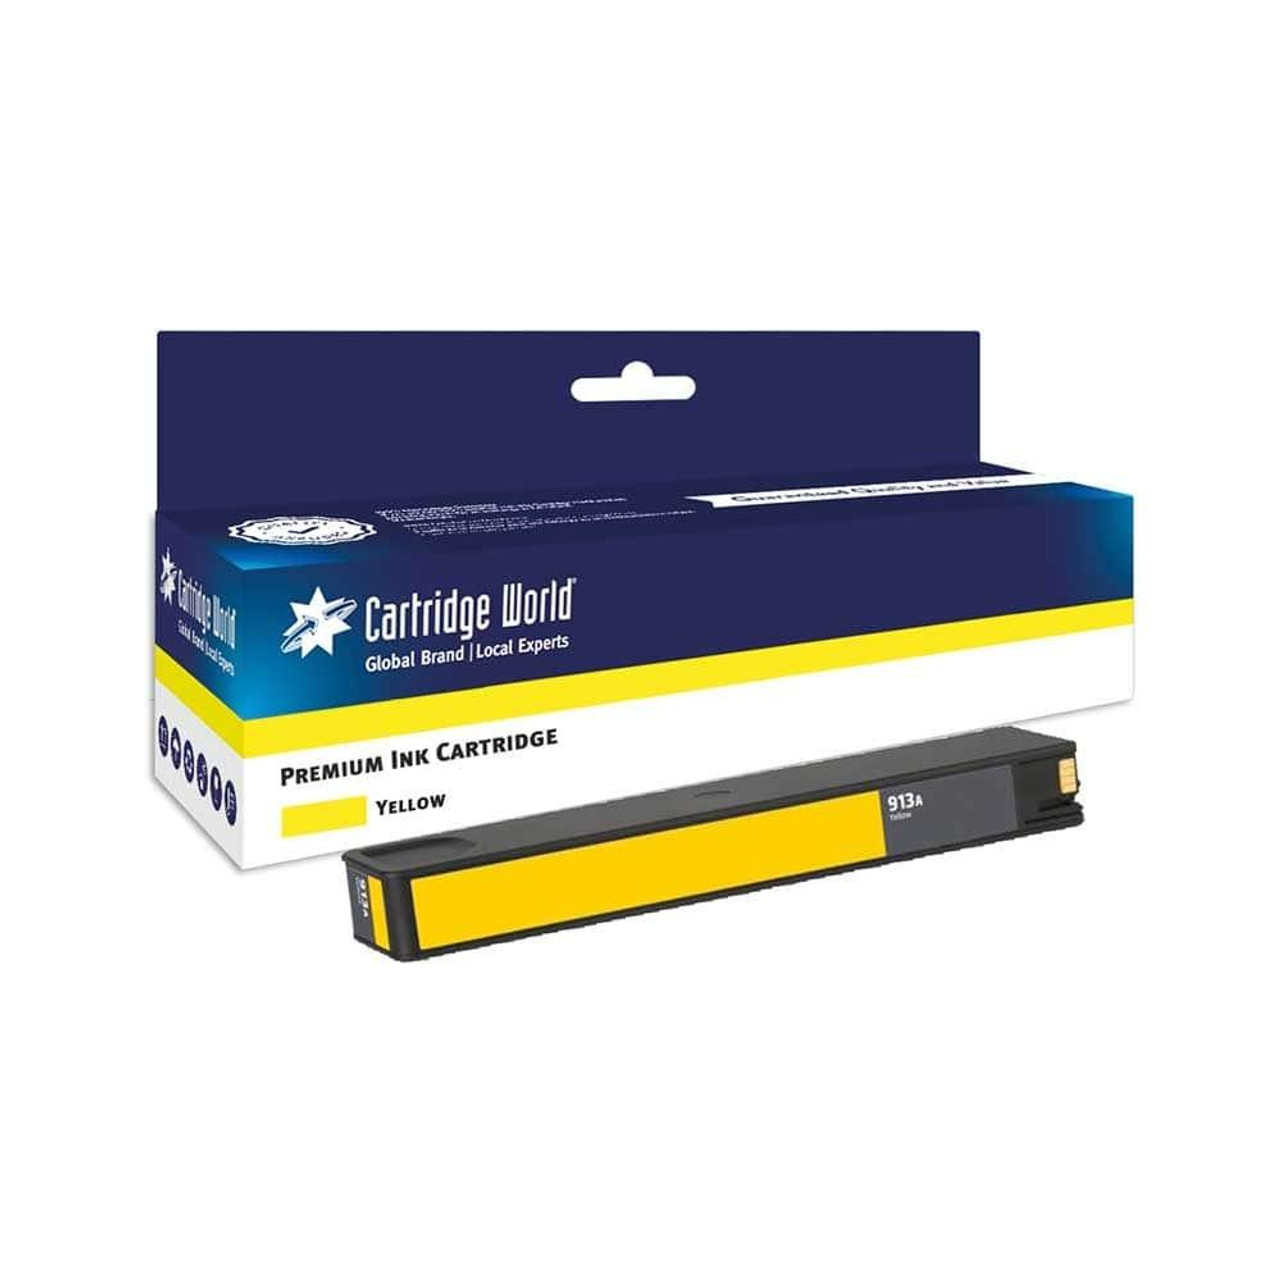 with HP 913A Yellow Inkjet Cartridge